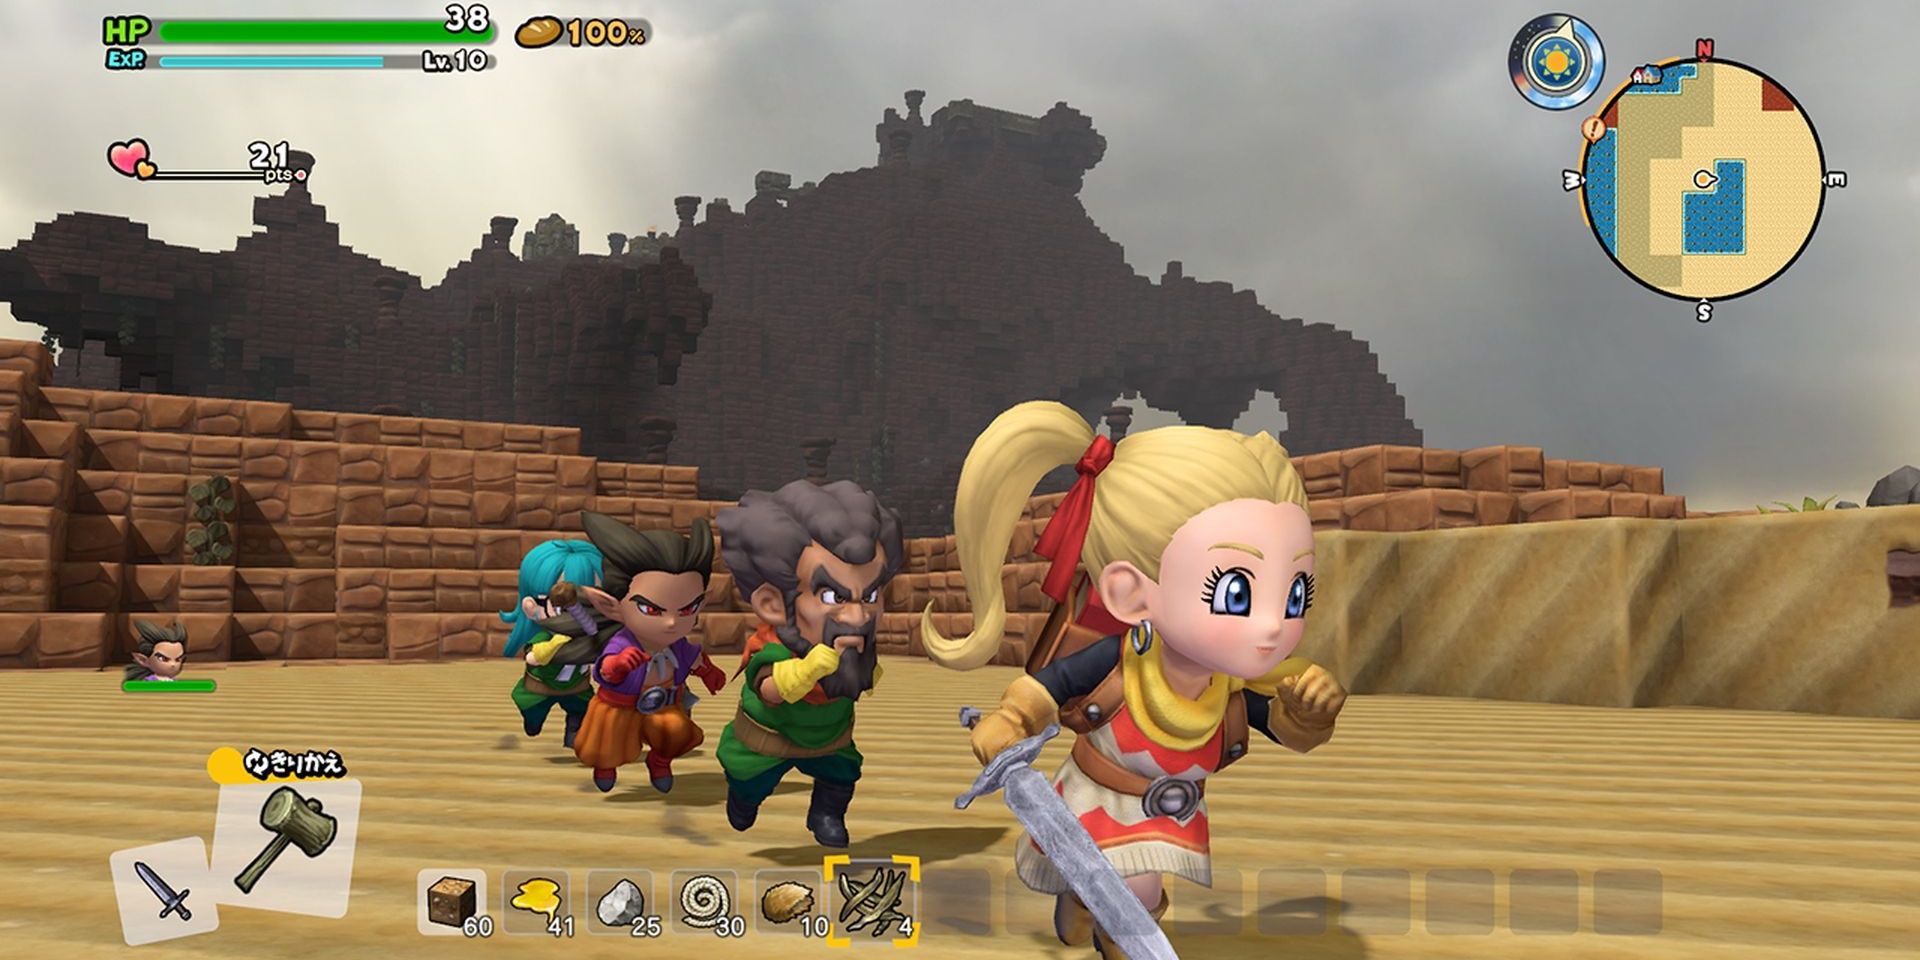 A player leads a group of three allies in Dragon Quest Builders 2